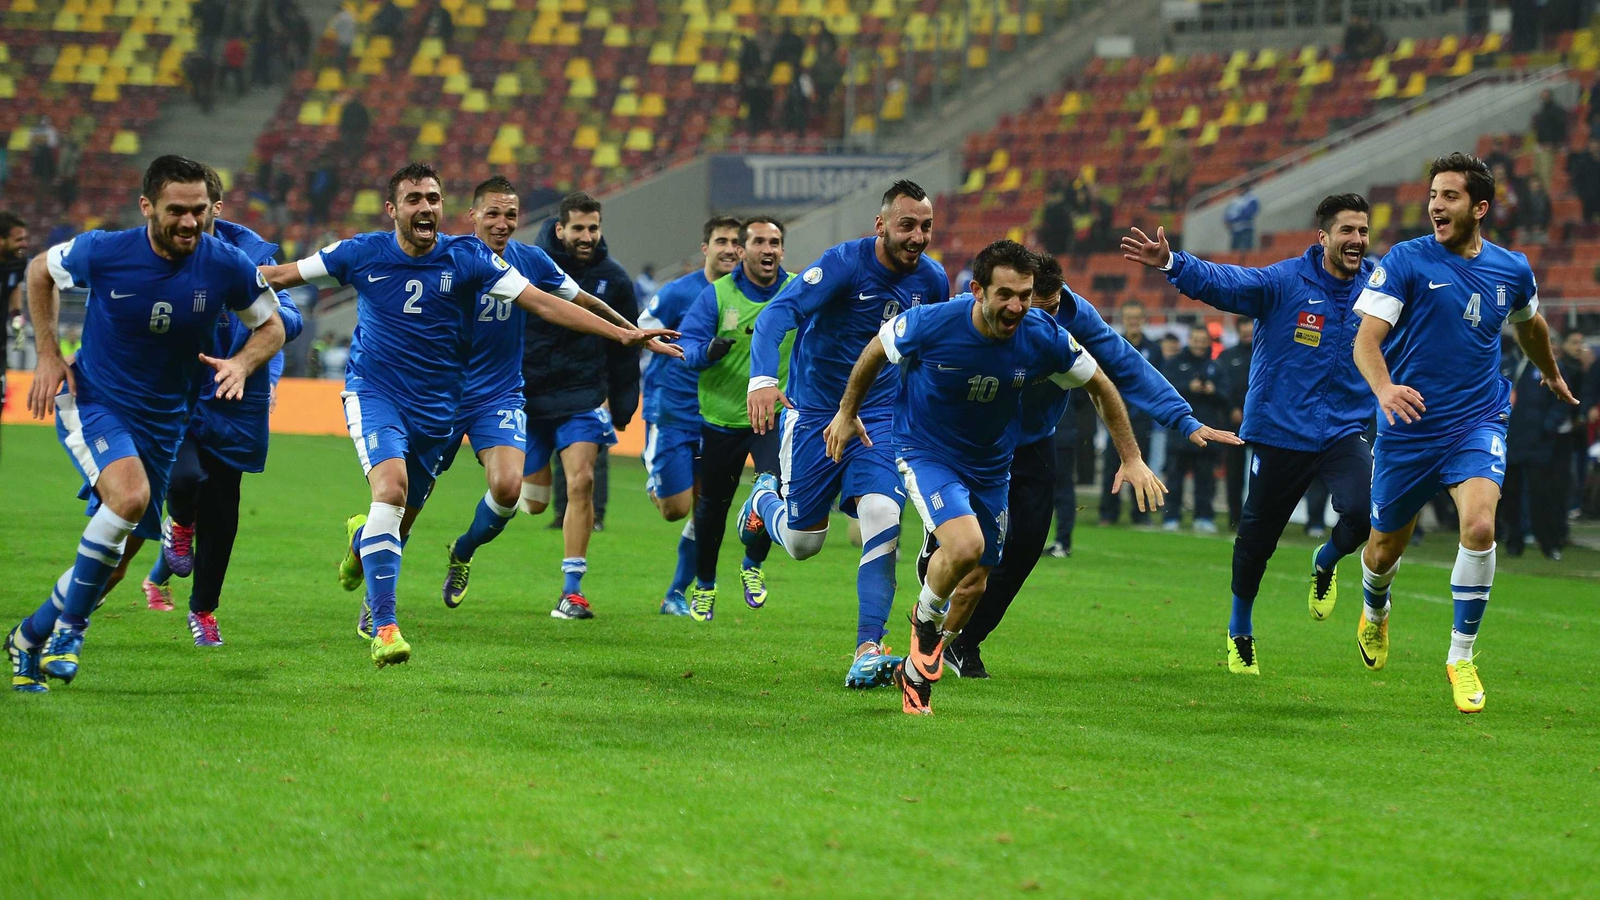 Greece earn draw to advance to World Cup